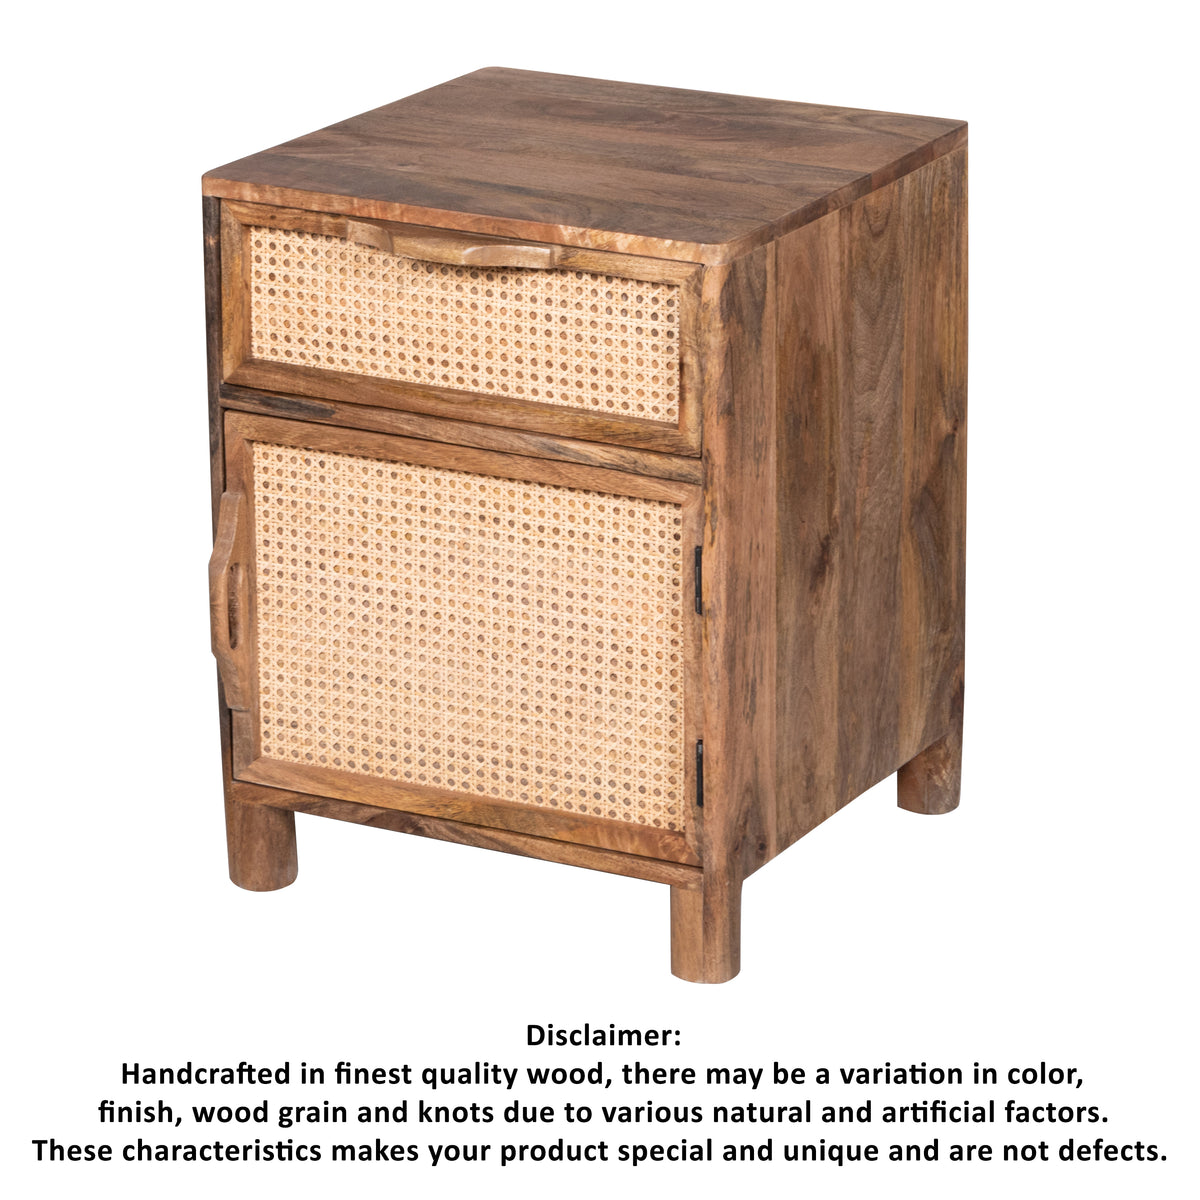 Mia 23 Inch Nightstand, Woven Rattan Cabinet Door and Drawer, Handcrafted Natural Brown Mango Wood - UPT-301715